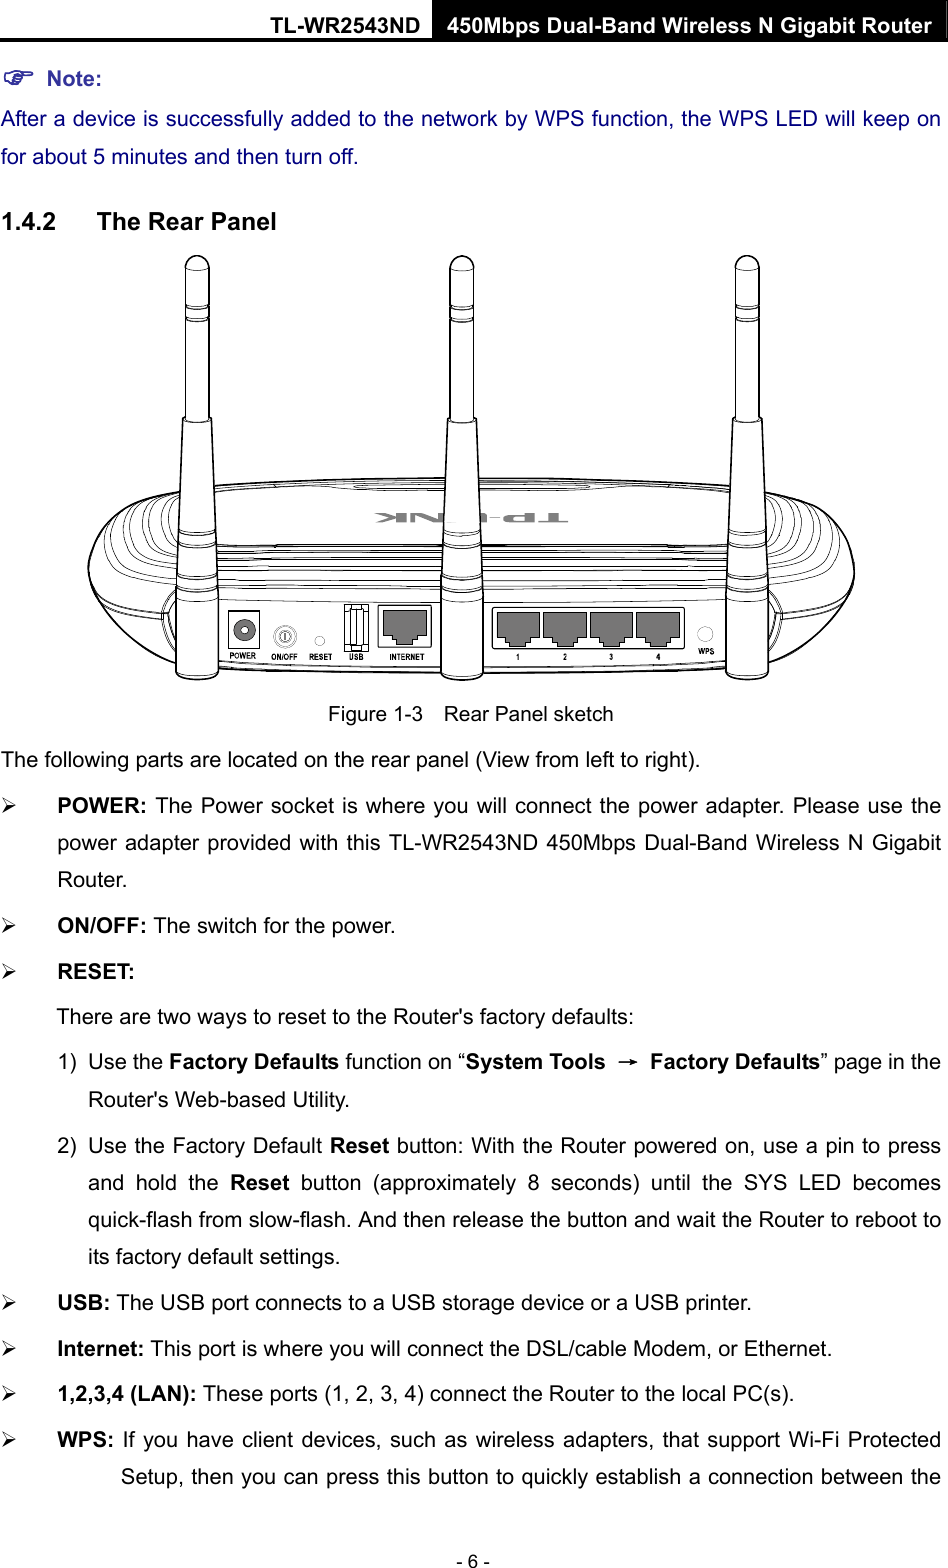 TL-WR2543ND 450Mbps Dual-Band Wireless N Gigabit Router - 6 - ) Note: After a device is successfully added to the network by WPS function, the WPS LED will keep on for about 5 minutes and then turn off.   1.4.2  The Rear Panel  Figure 1-3    Rear Panel sketch The following parts are located on the rear panel (View from left to right). ¾ POWER: The Power socket is where you will connect the power adapter. Please use the power adapter provided with this TL-WR2543ND 450Mbps Dual-Band Wireless N Gigabit Router. ¾ ON/OFF: The switch for the power. ¾ RESET: There are two ways to reset to the Router&apos;s factory defaults: 1) Use the Factory Defaults function on “System Tools  → Factory Defaults” page in the Router&apos;s Web-based Utility. 2)  Use the Factory Default Reset button: With the Router powered on, use a pin to press and hold the Reset button (approximately 8 seconds) until the SYS LED becomes quick-flash from slow-flash. And then release the button and wait the Router to reboot to its factory default settings. ¾ USB: The USB port connects to a USB storage device or a USB printer. ¾ Internet: This port is where you will connect the DSL/cable Modem, or Ethernet. ¾ 1,2,3,4 (LAN): These ports (1, 2, 3, 4) connect the Router to the local PC(s). ¾ WPS: If you have client devices, such as wireless adapters, that support Wi-Fi Protected Setup, then you can press this button to quickly establish a connection between the 